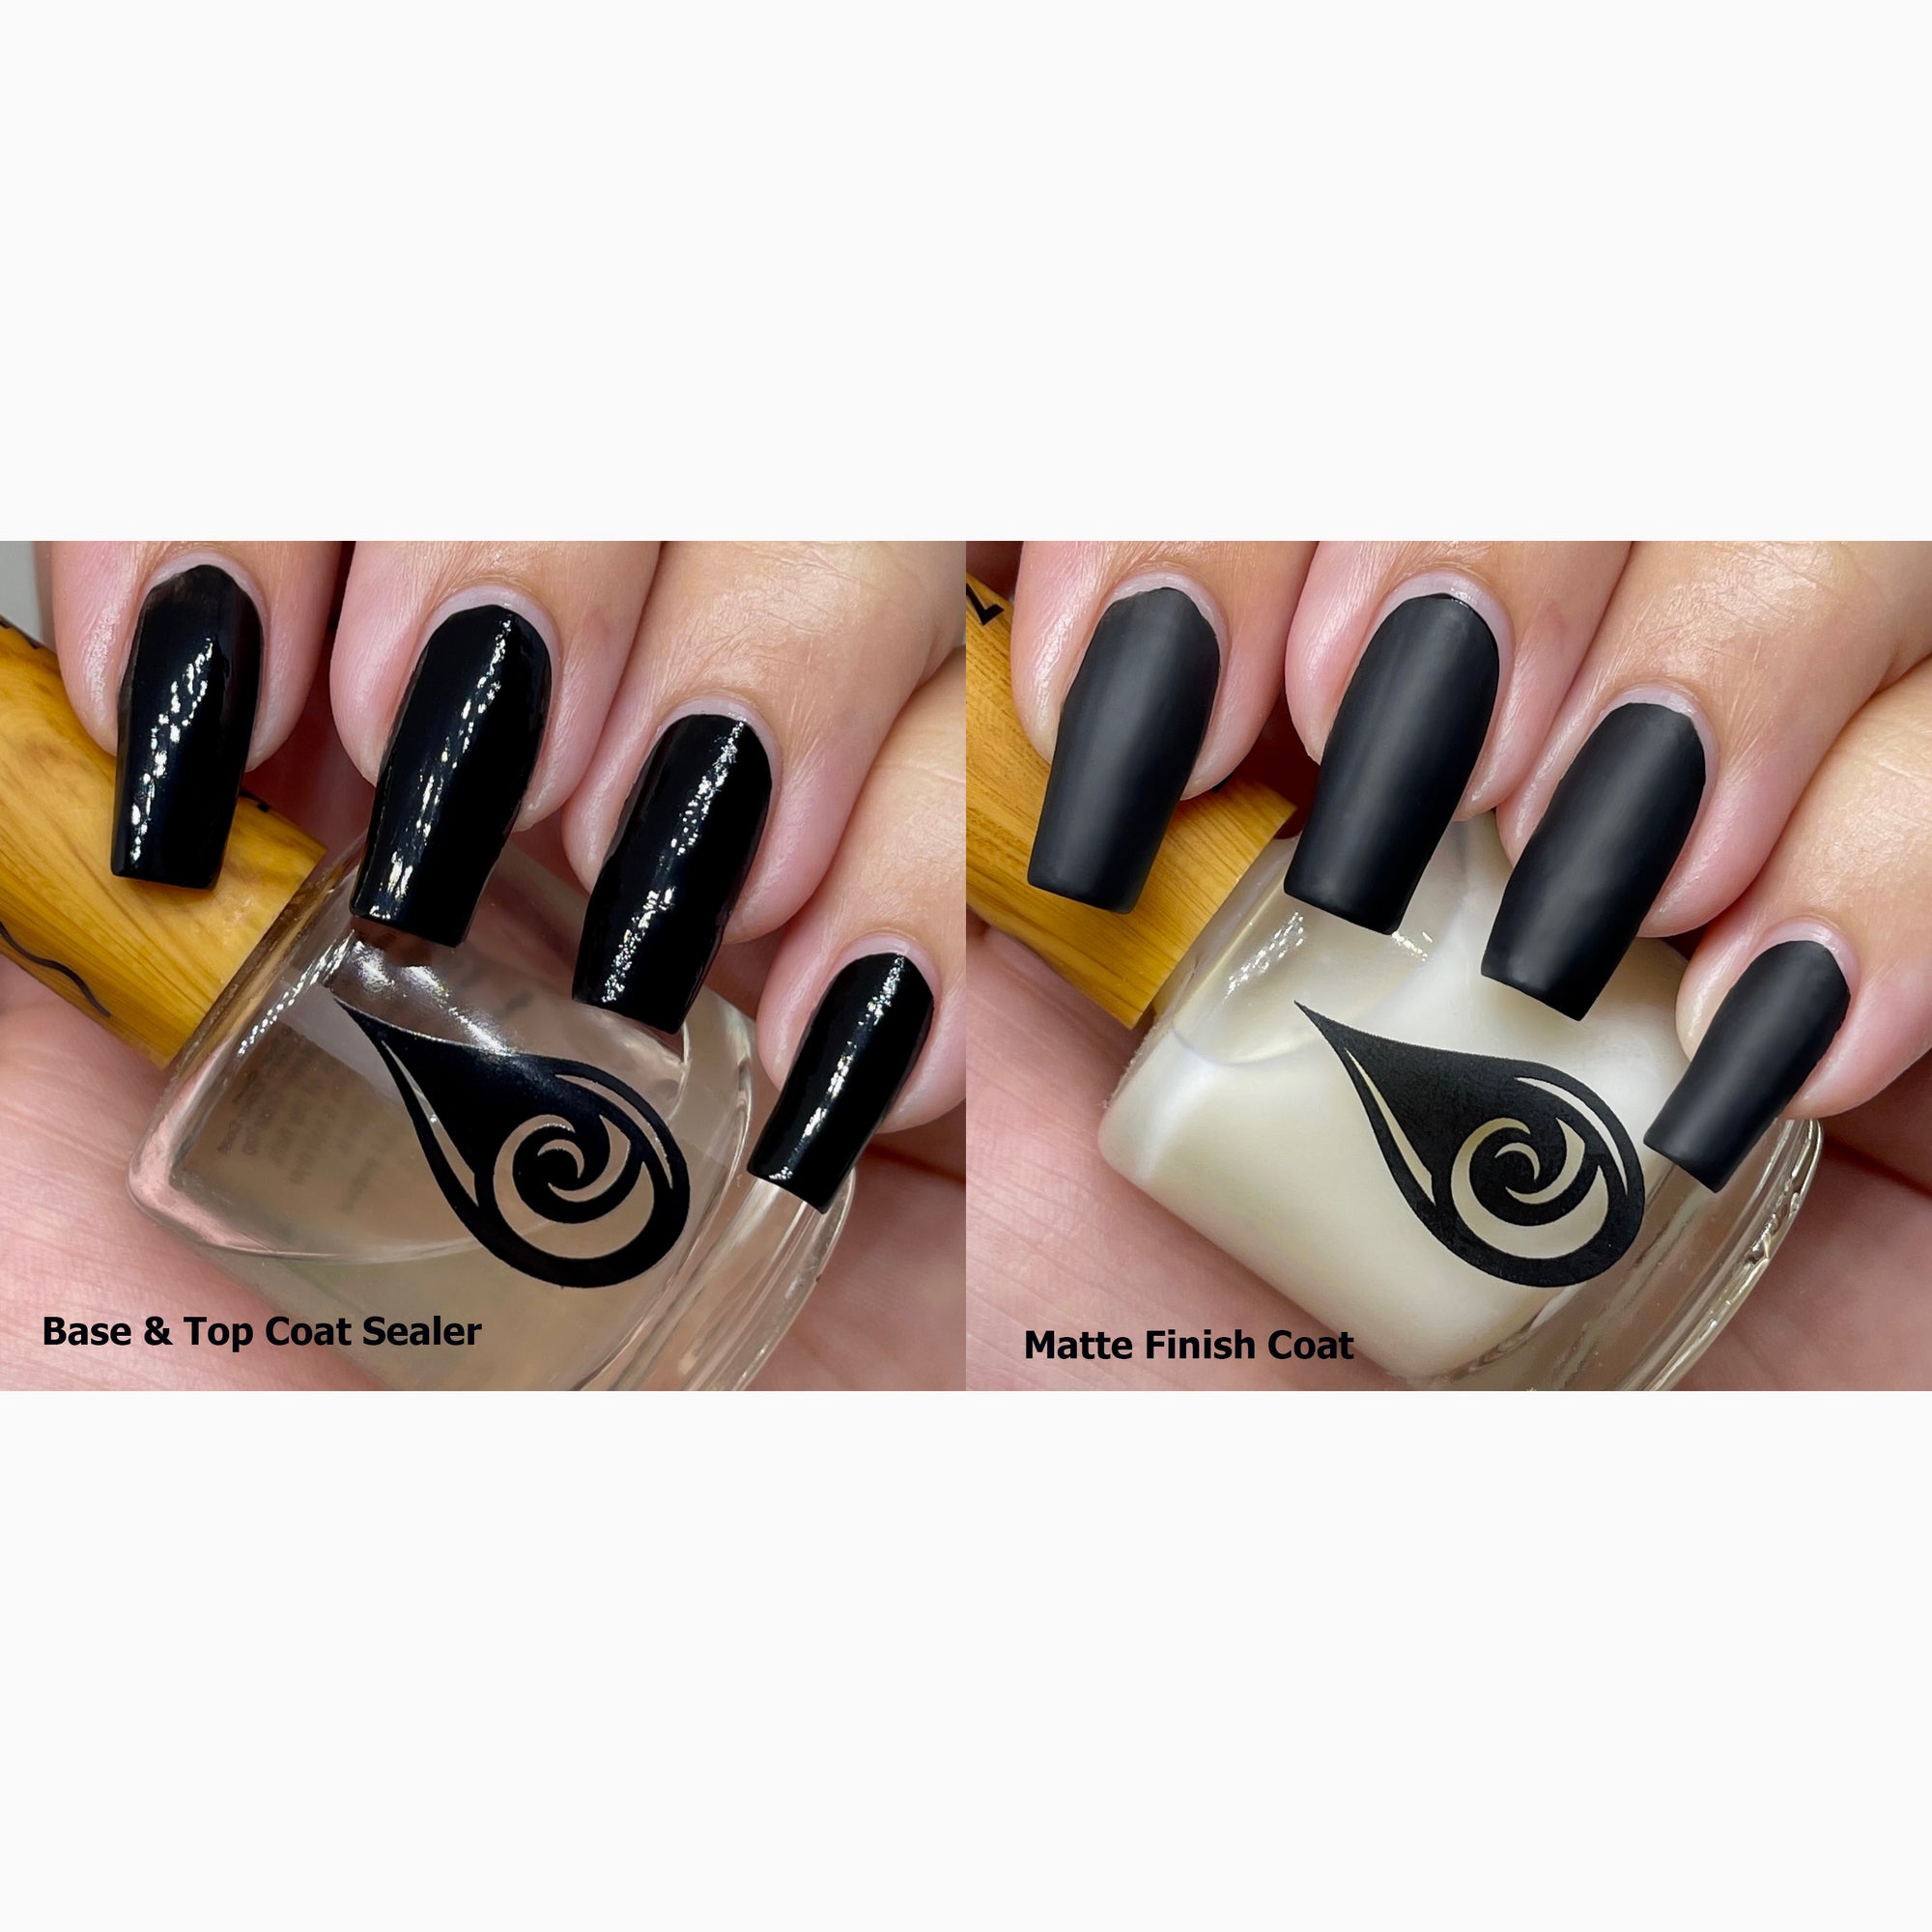 Buy DeBelle Gel Nail Polish Gift Set of 2 Luxe Noir(Black),Sombre Grey(Grey)  16ml (8 ml each Nail Paint) Online at Low Prices in India - Amazon.in